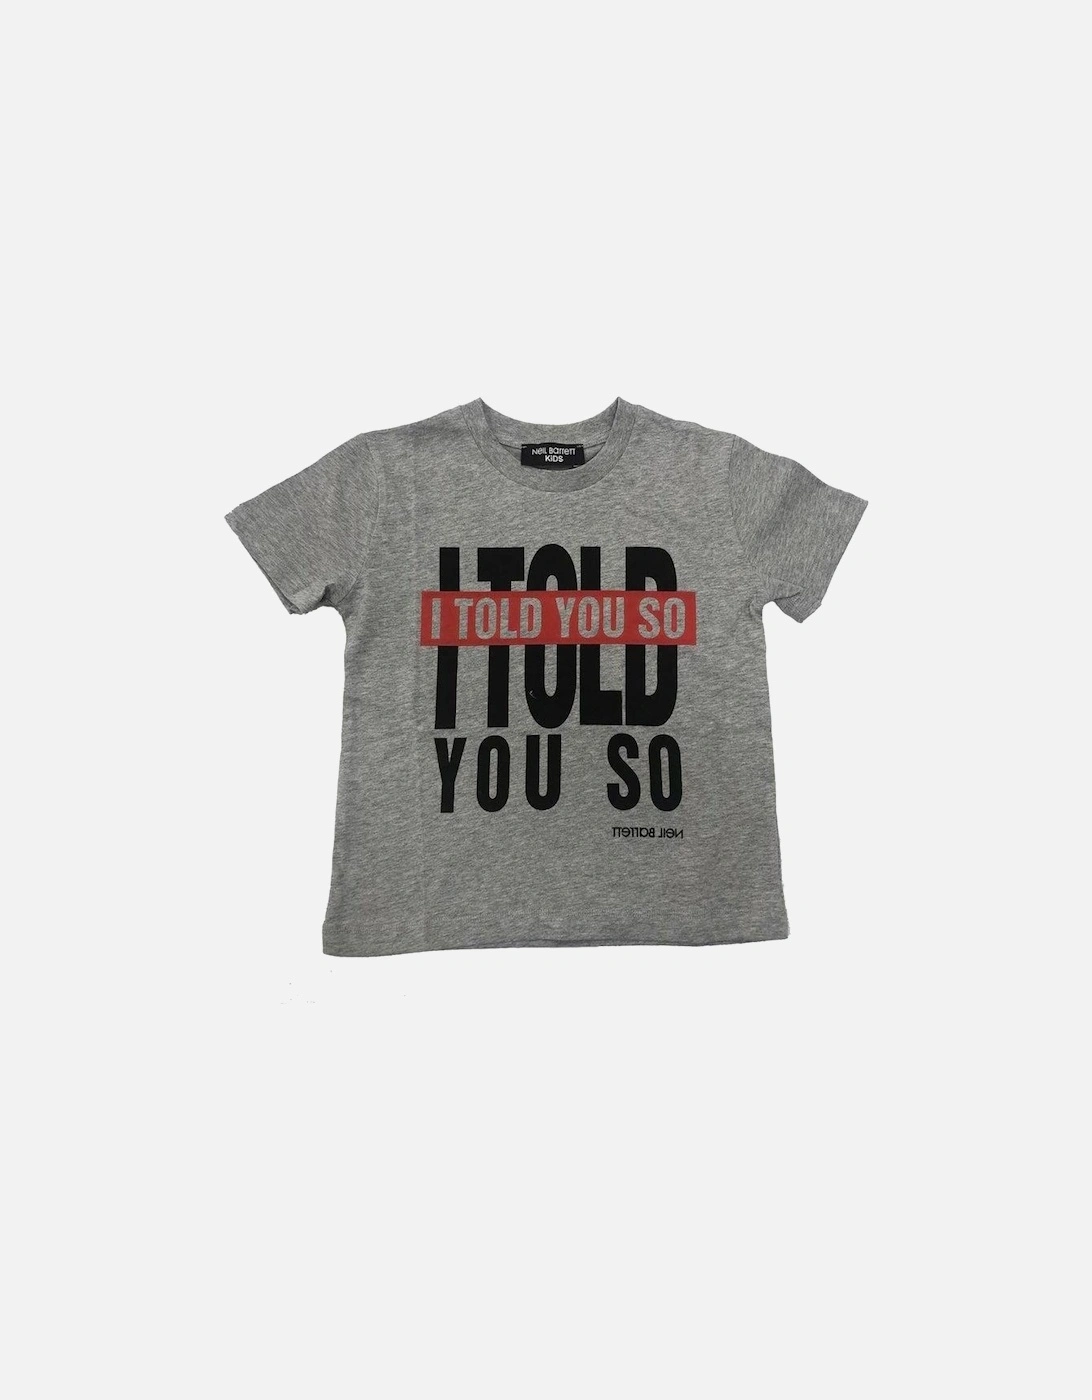 Boys Grey Cotton "Told you So" T-Shirt, 2 of 1